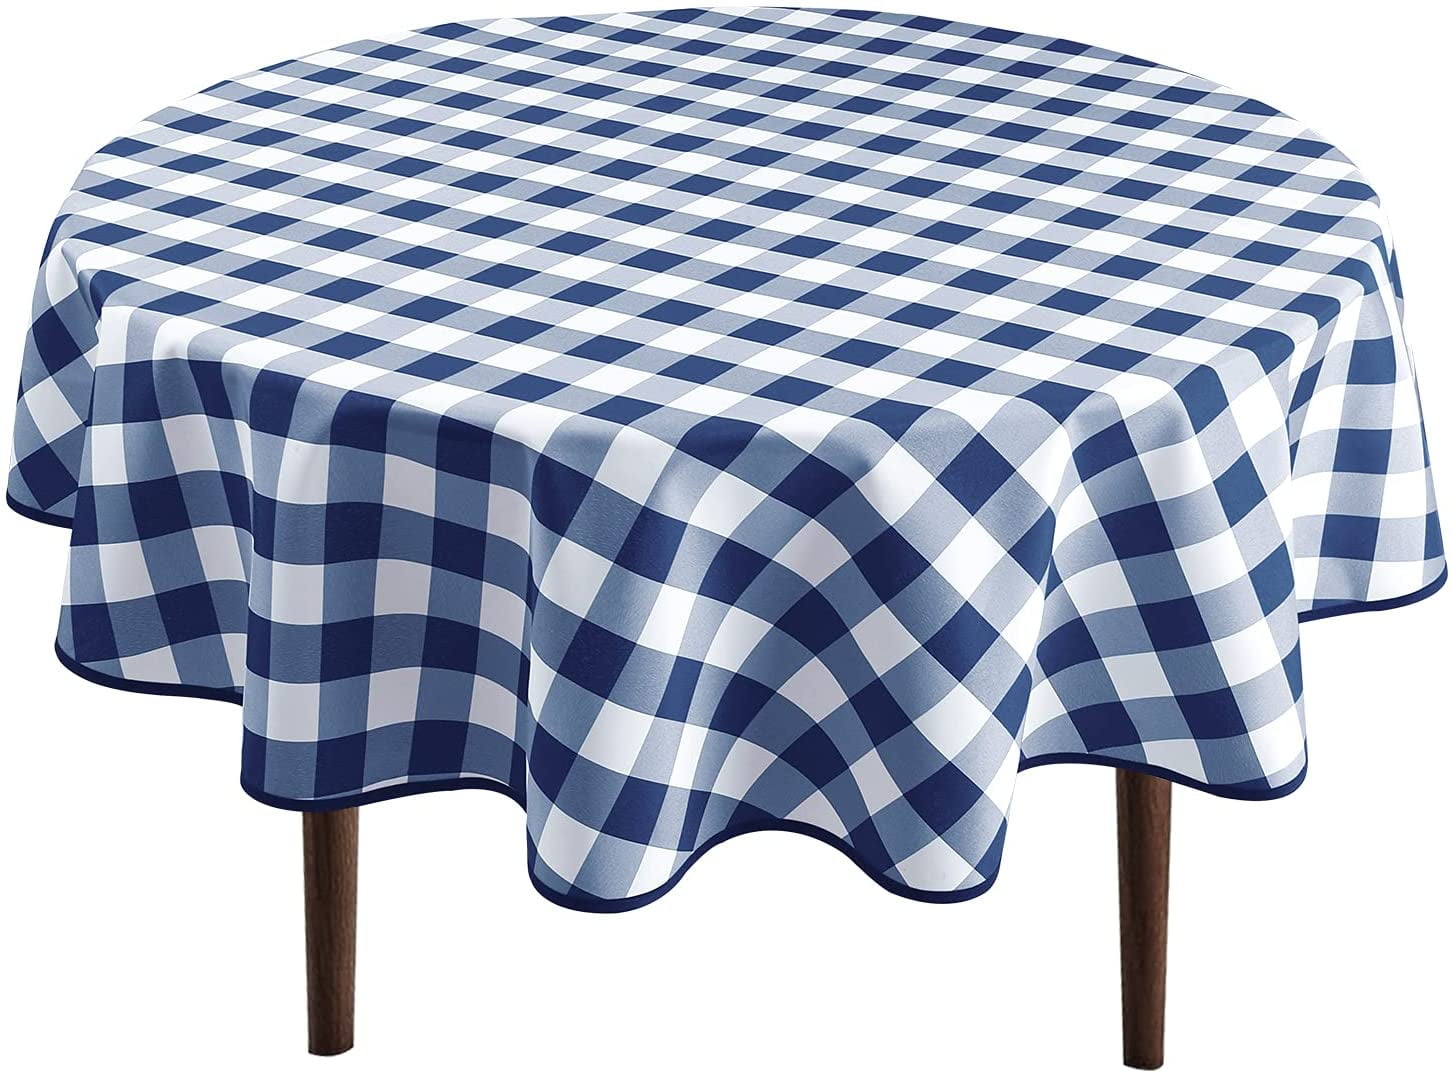 Navy Blue and White Hiasan Checkered Round Tablecloth 50 Inch Waterproof Stain and Wrinkle Resistant Washable Fabric Table Cloth for Dining Room Party Outdoor Picnic 